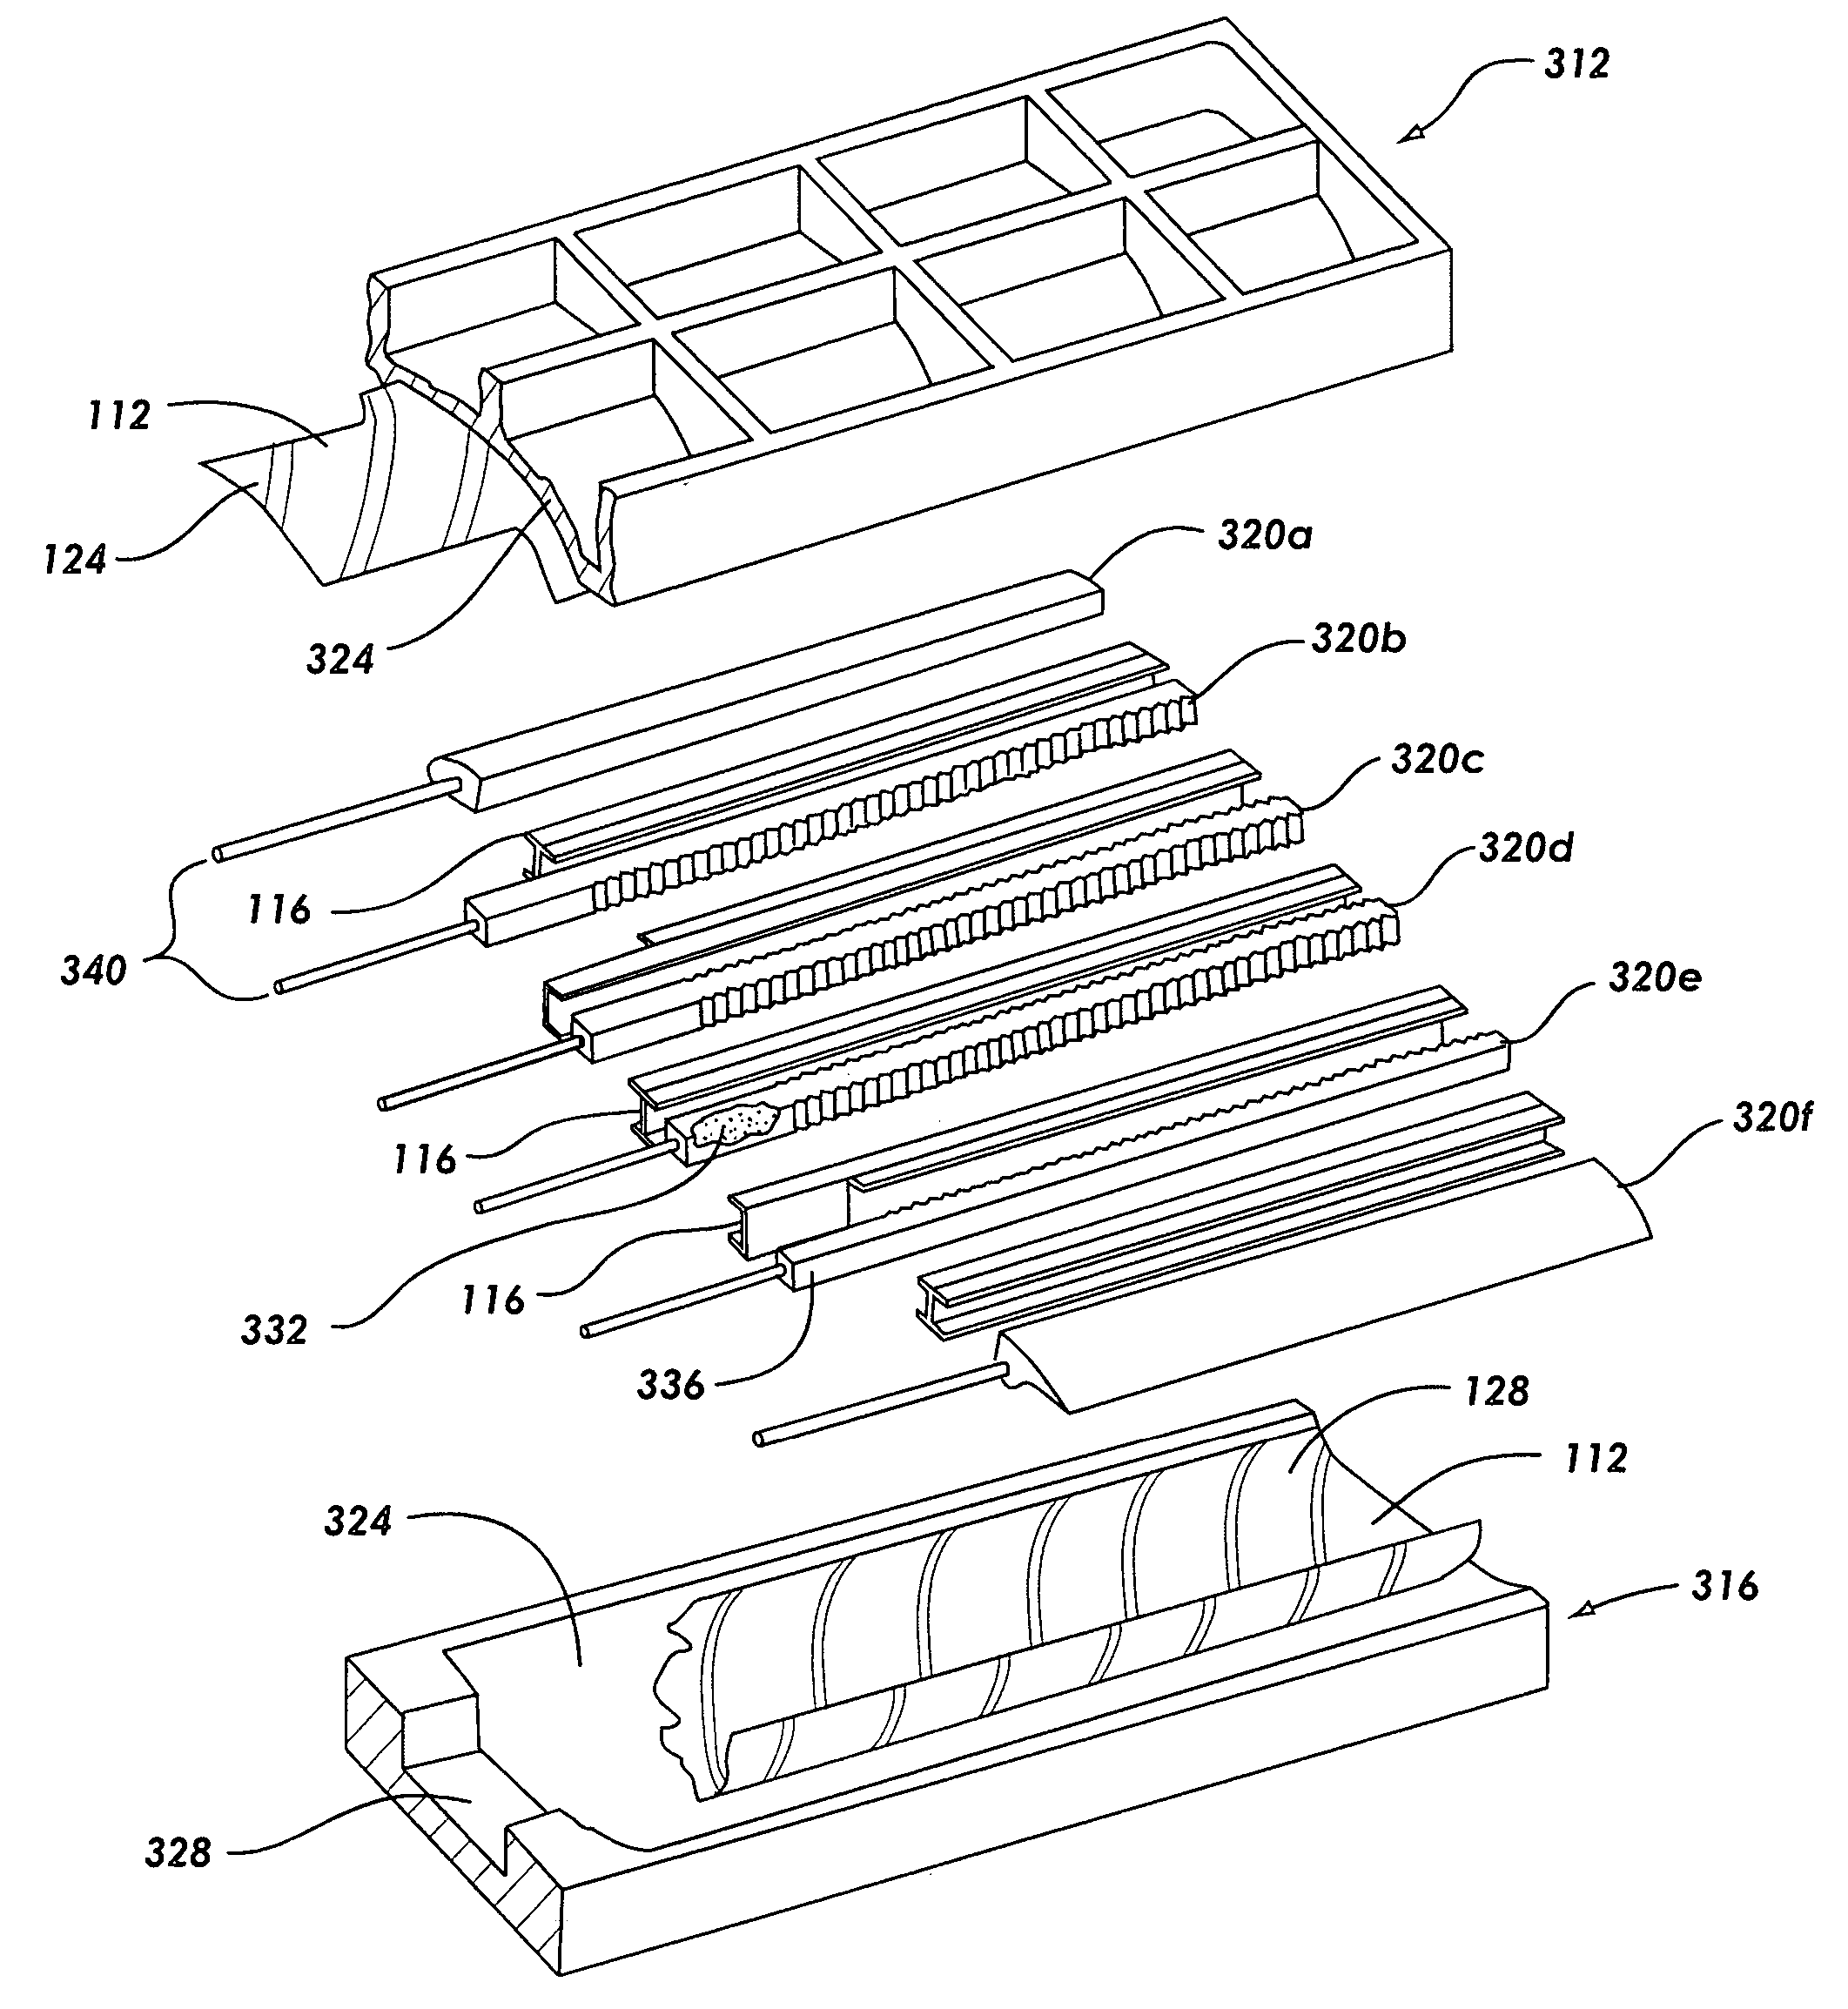 Process for forming a single piece co-cure composite wing